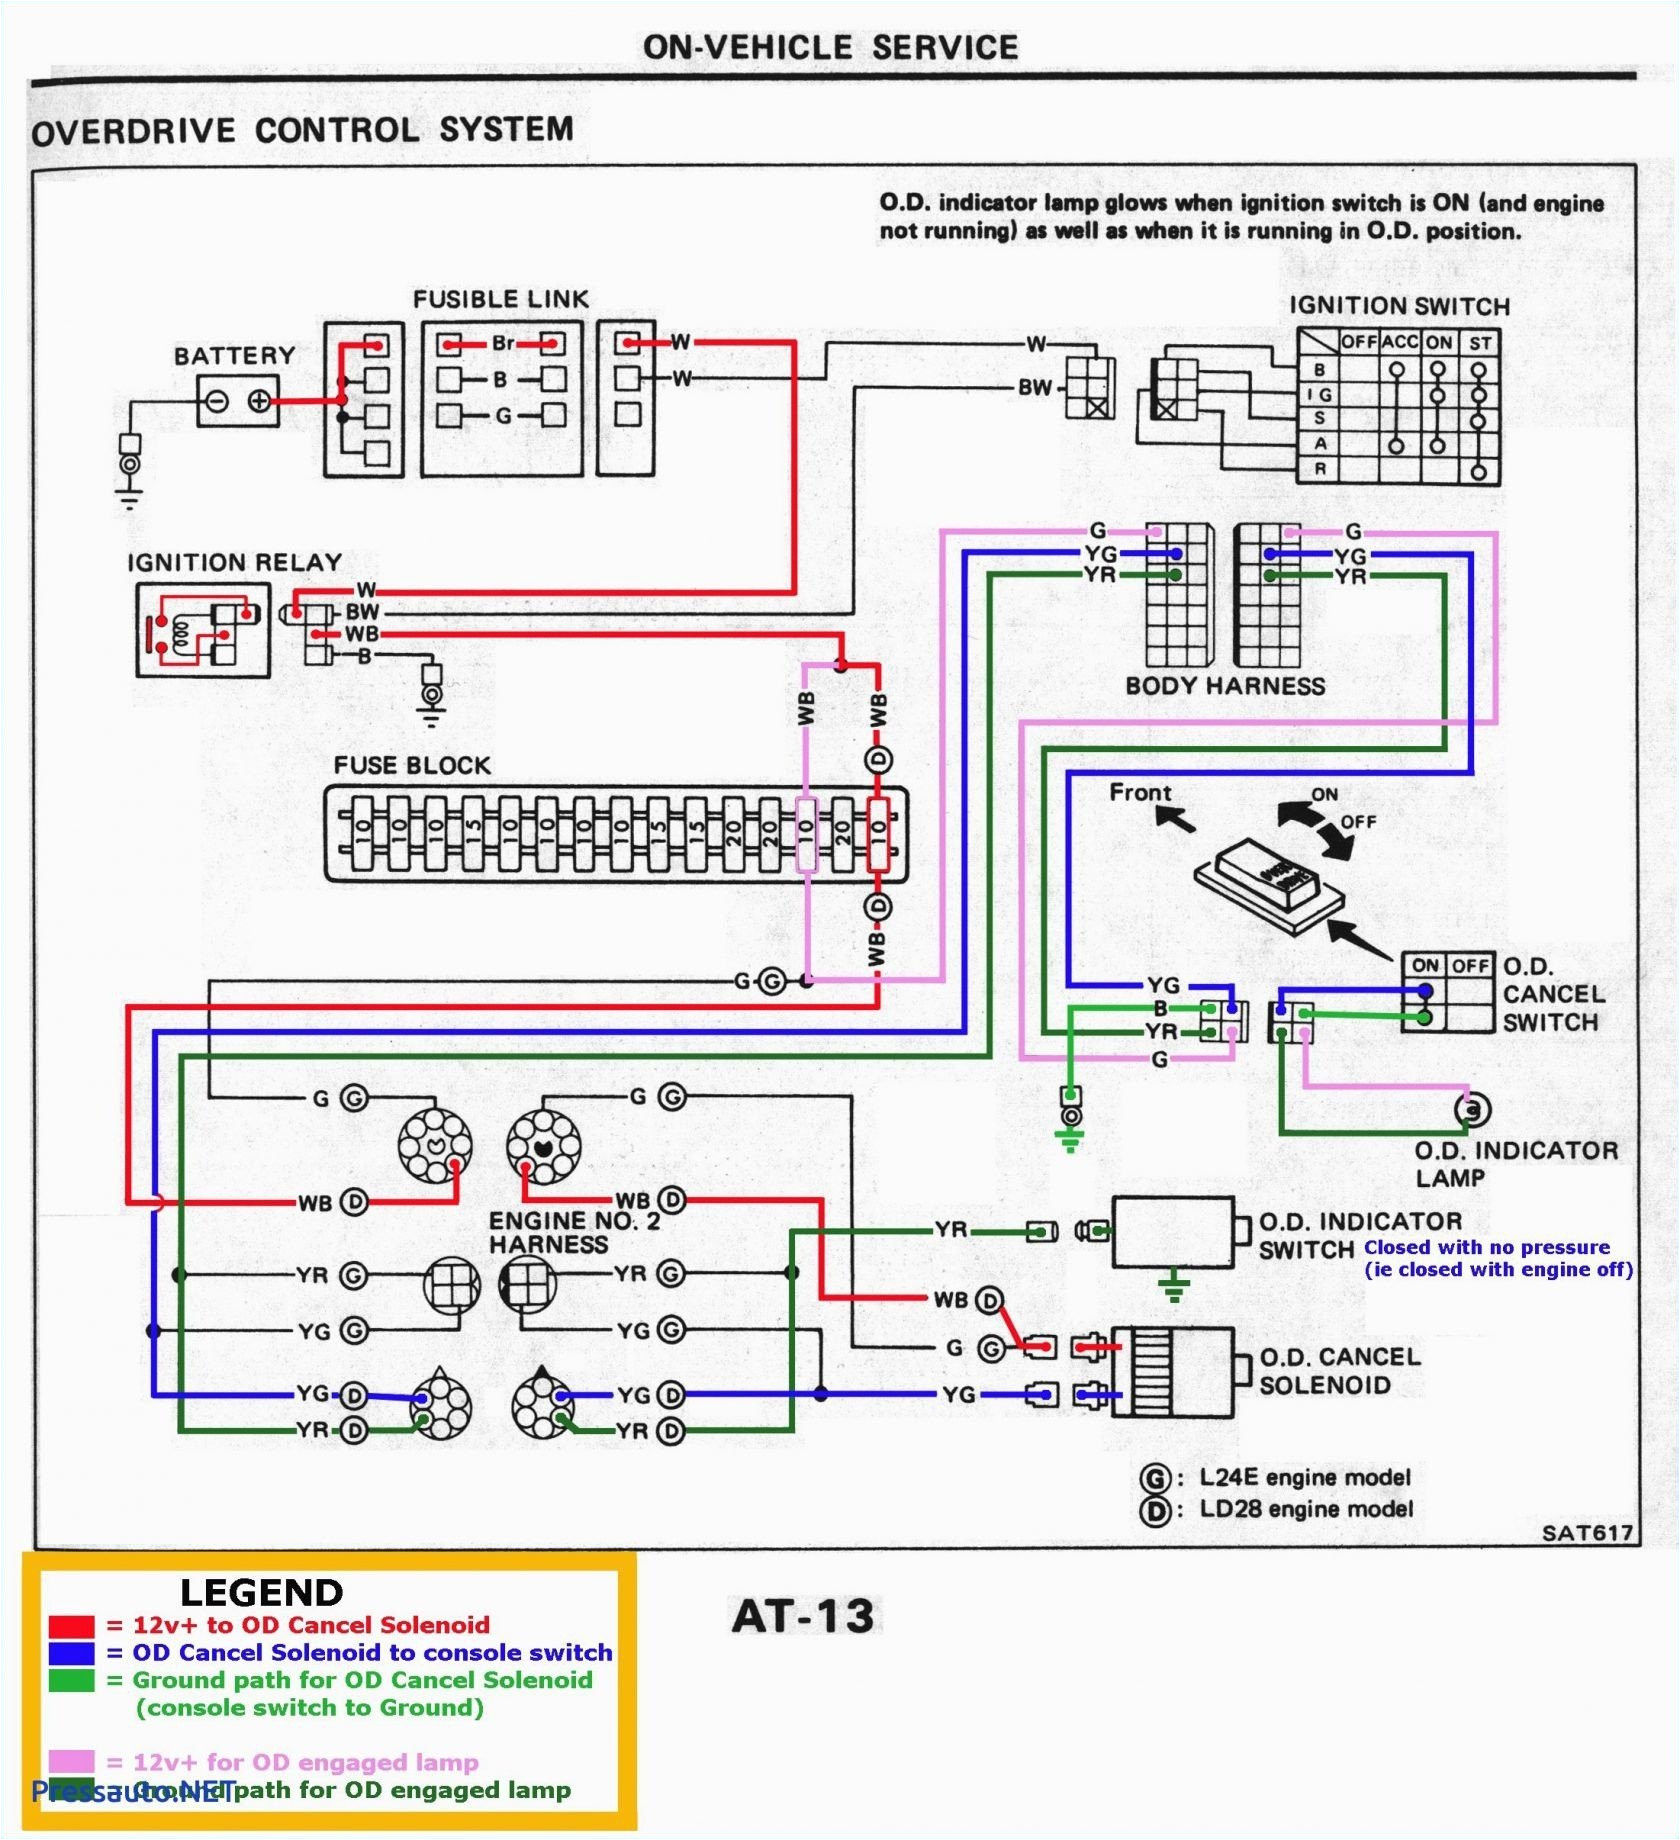 ae wiring diagram wiring diagram toolbox ae q25 3 wire g13939 two way electric temperature control valve